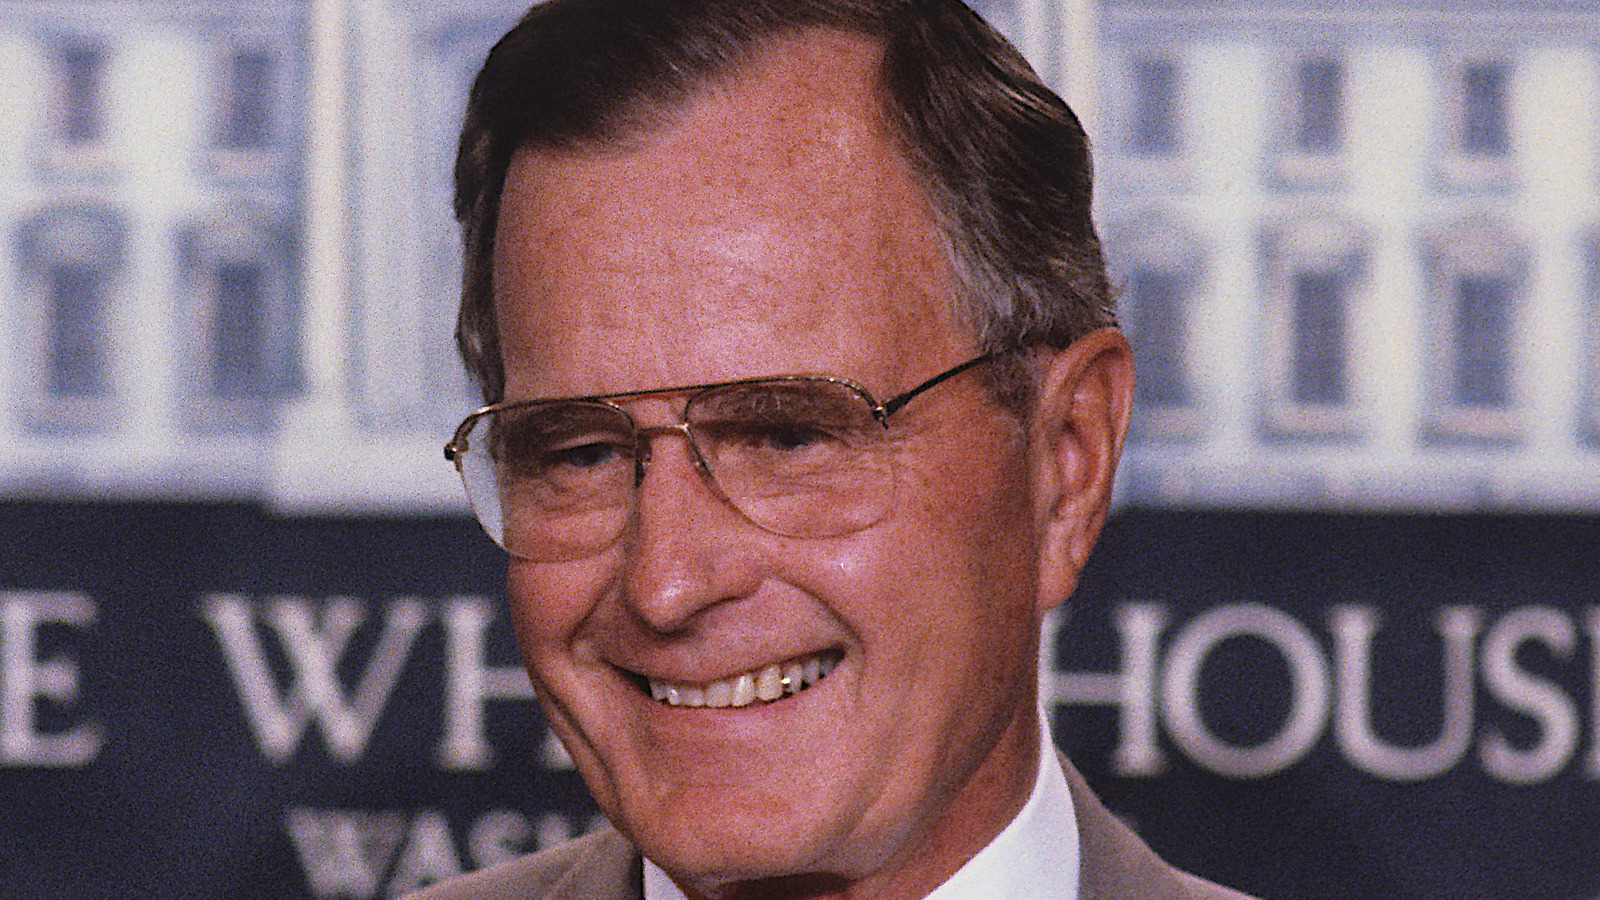 Questionable Things About George H W Bushs Presidency